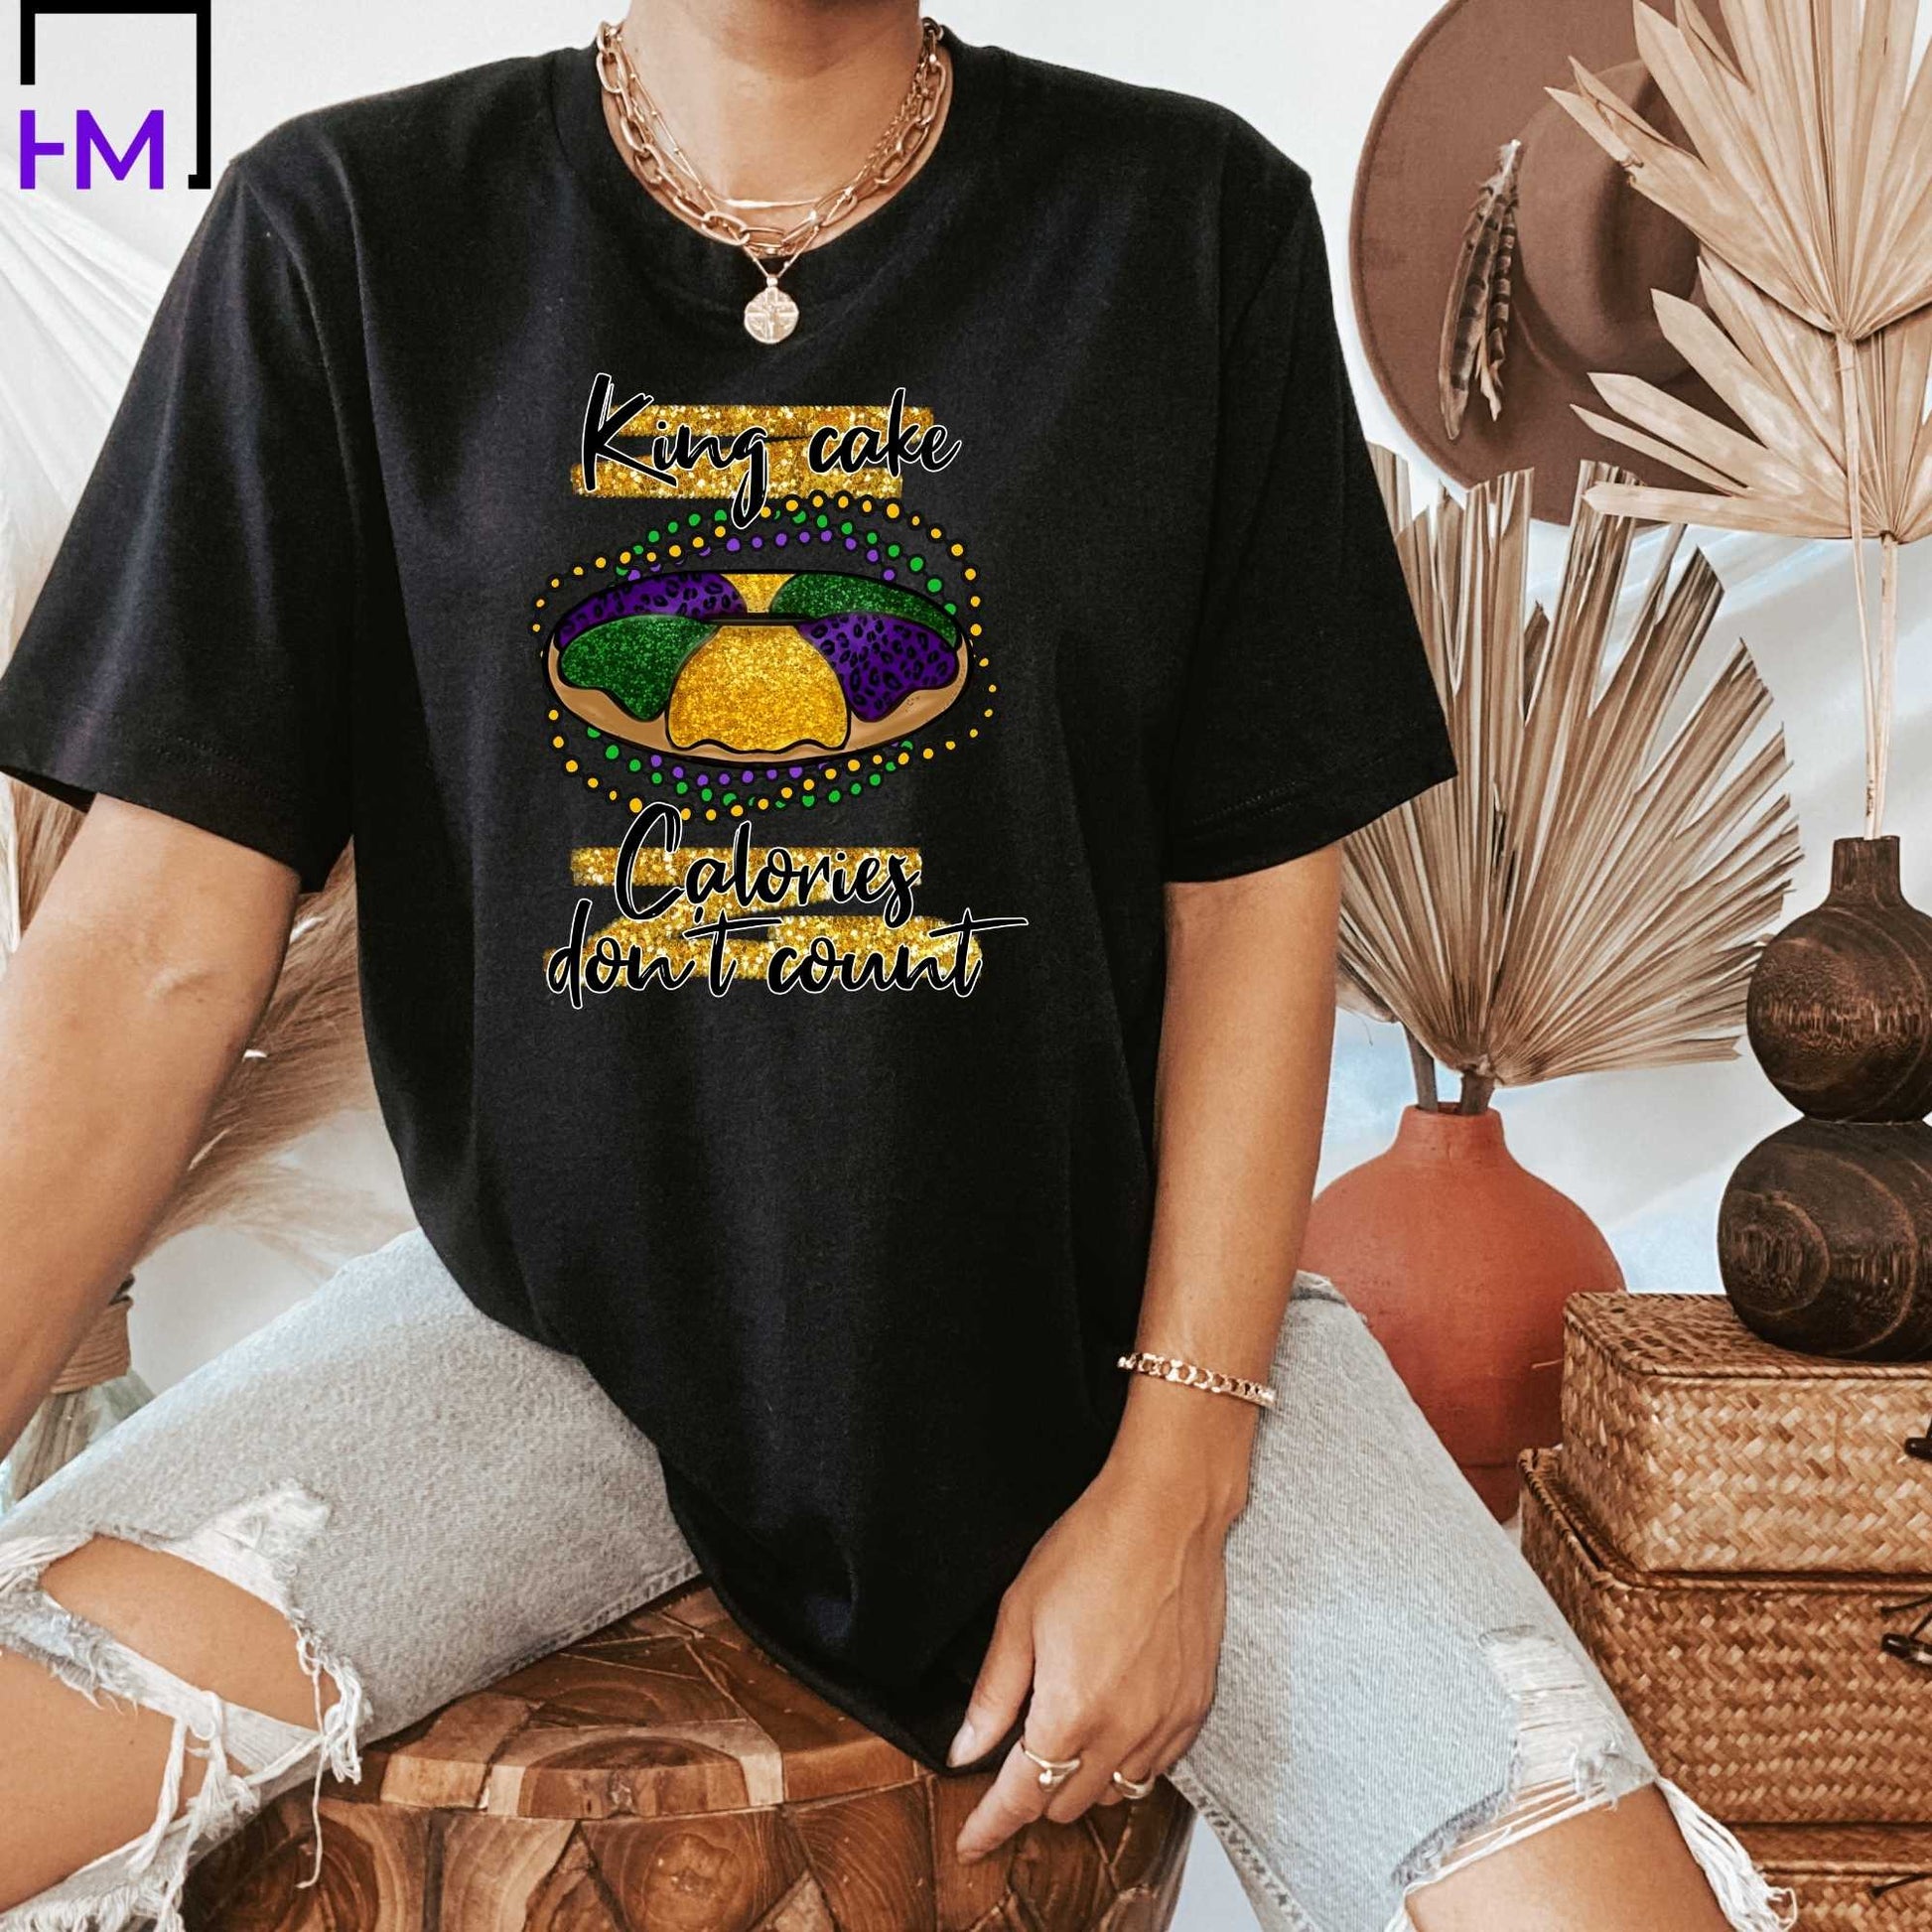 King Cake Mardi Gras Shirt or Tank Top for Women and Men, Plus Sizes Available Up to 5XL